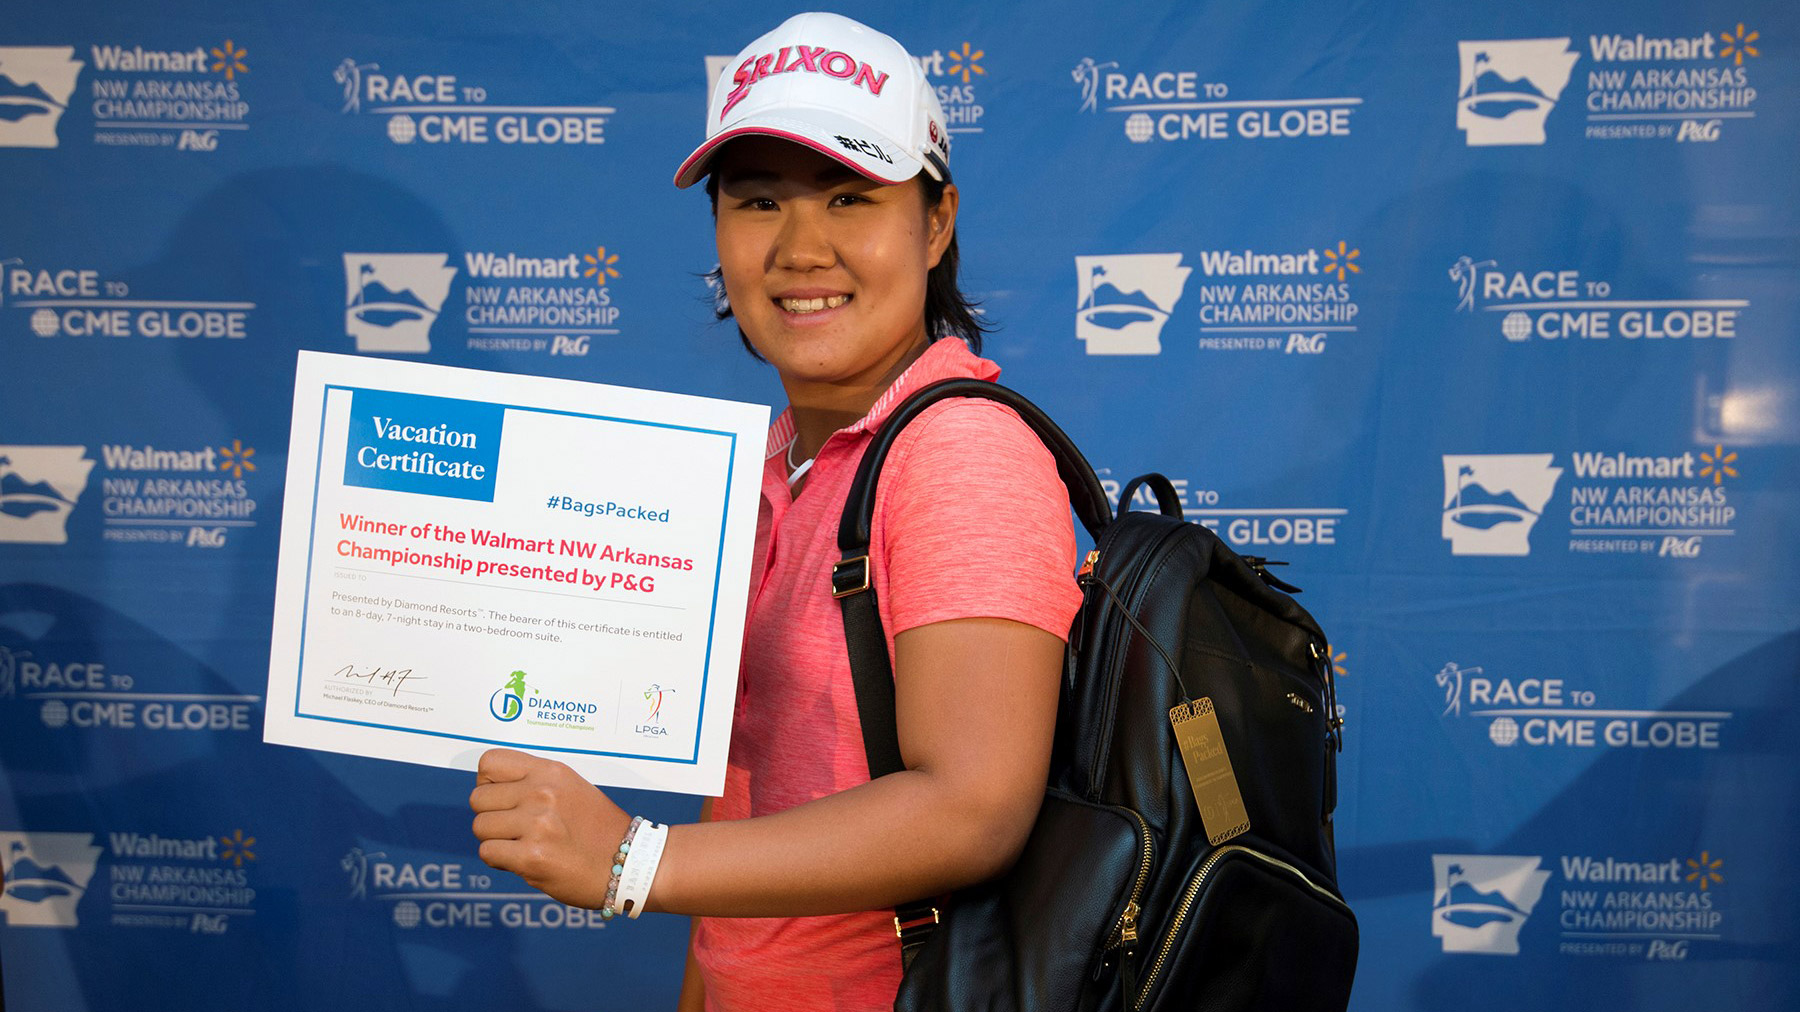 Nasa Hataoka has her #BagsPacked for the 2018 Diamond Resorts Tournament of Champions after her victory at the 2018 Walmart NW Arkansas Championship presented by P&G